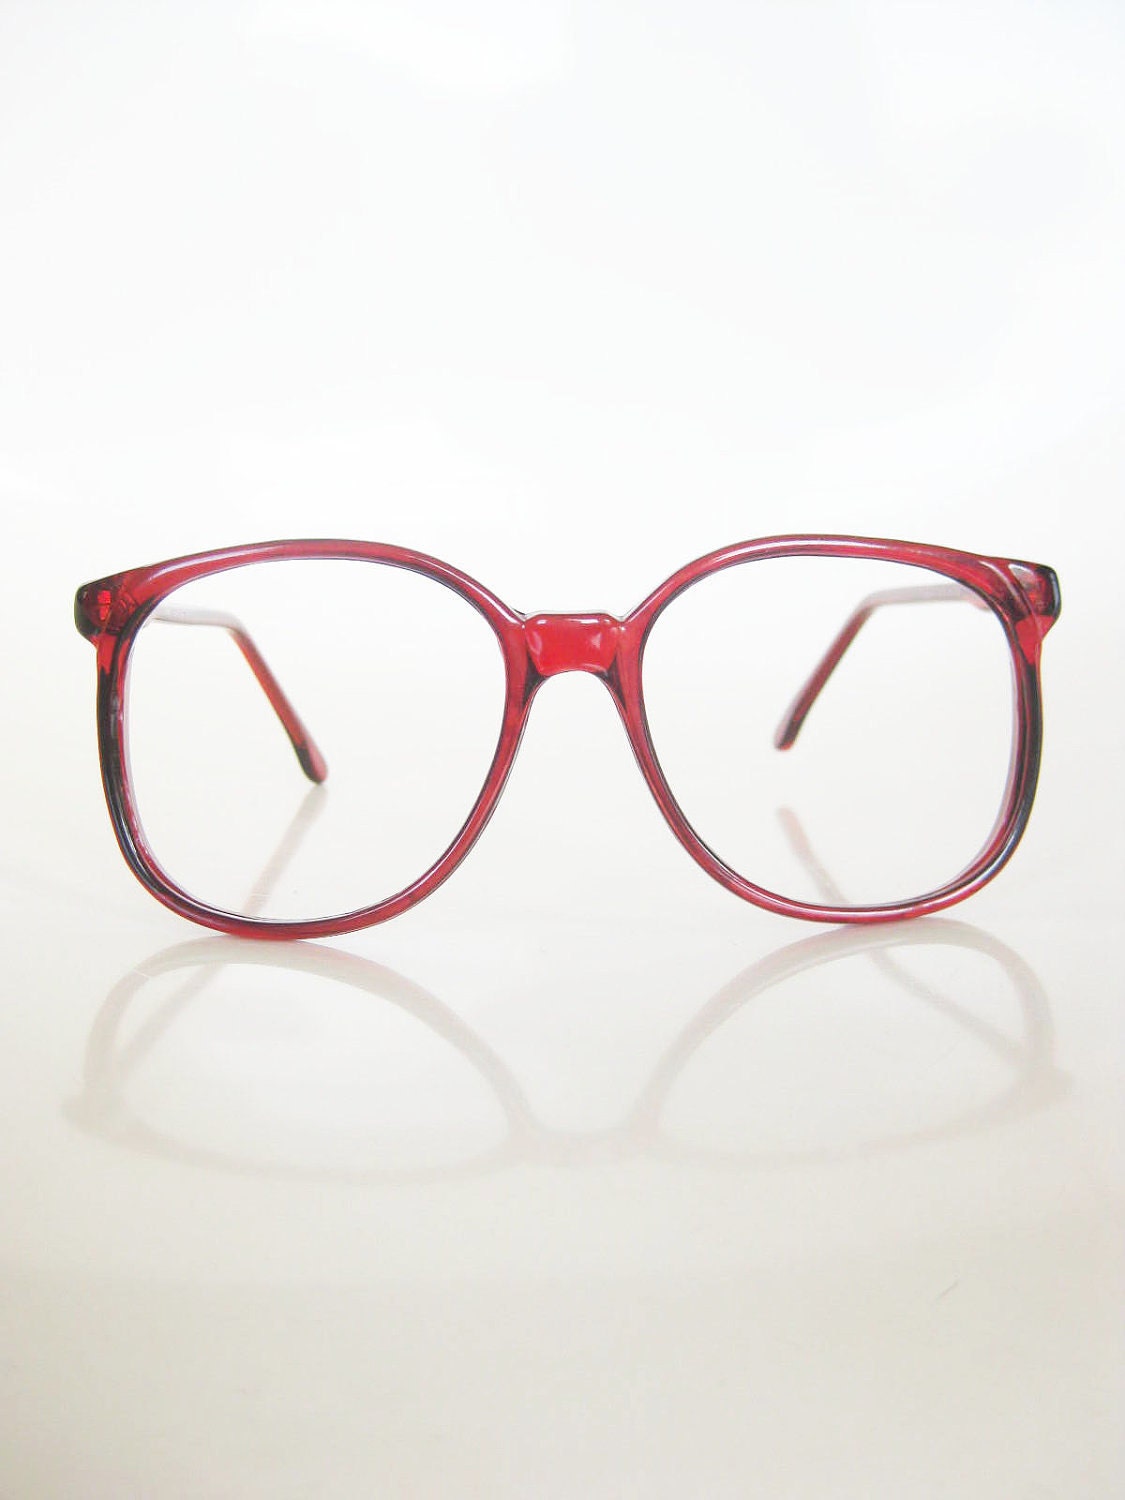 Anime Eye Glasses Red Frames Undeniable Proof That Those Who Wear